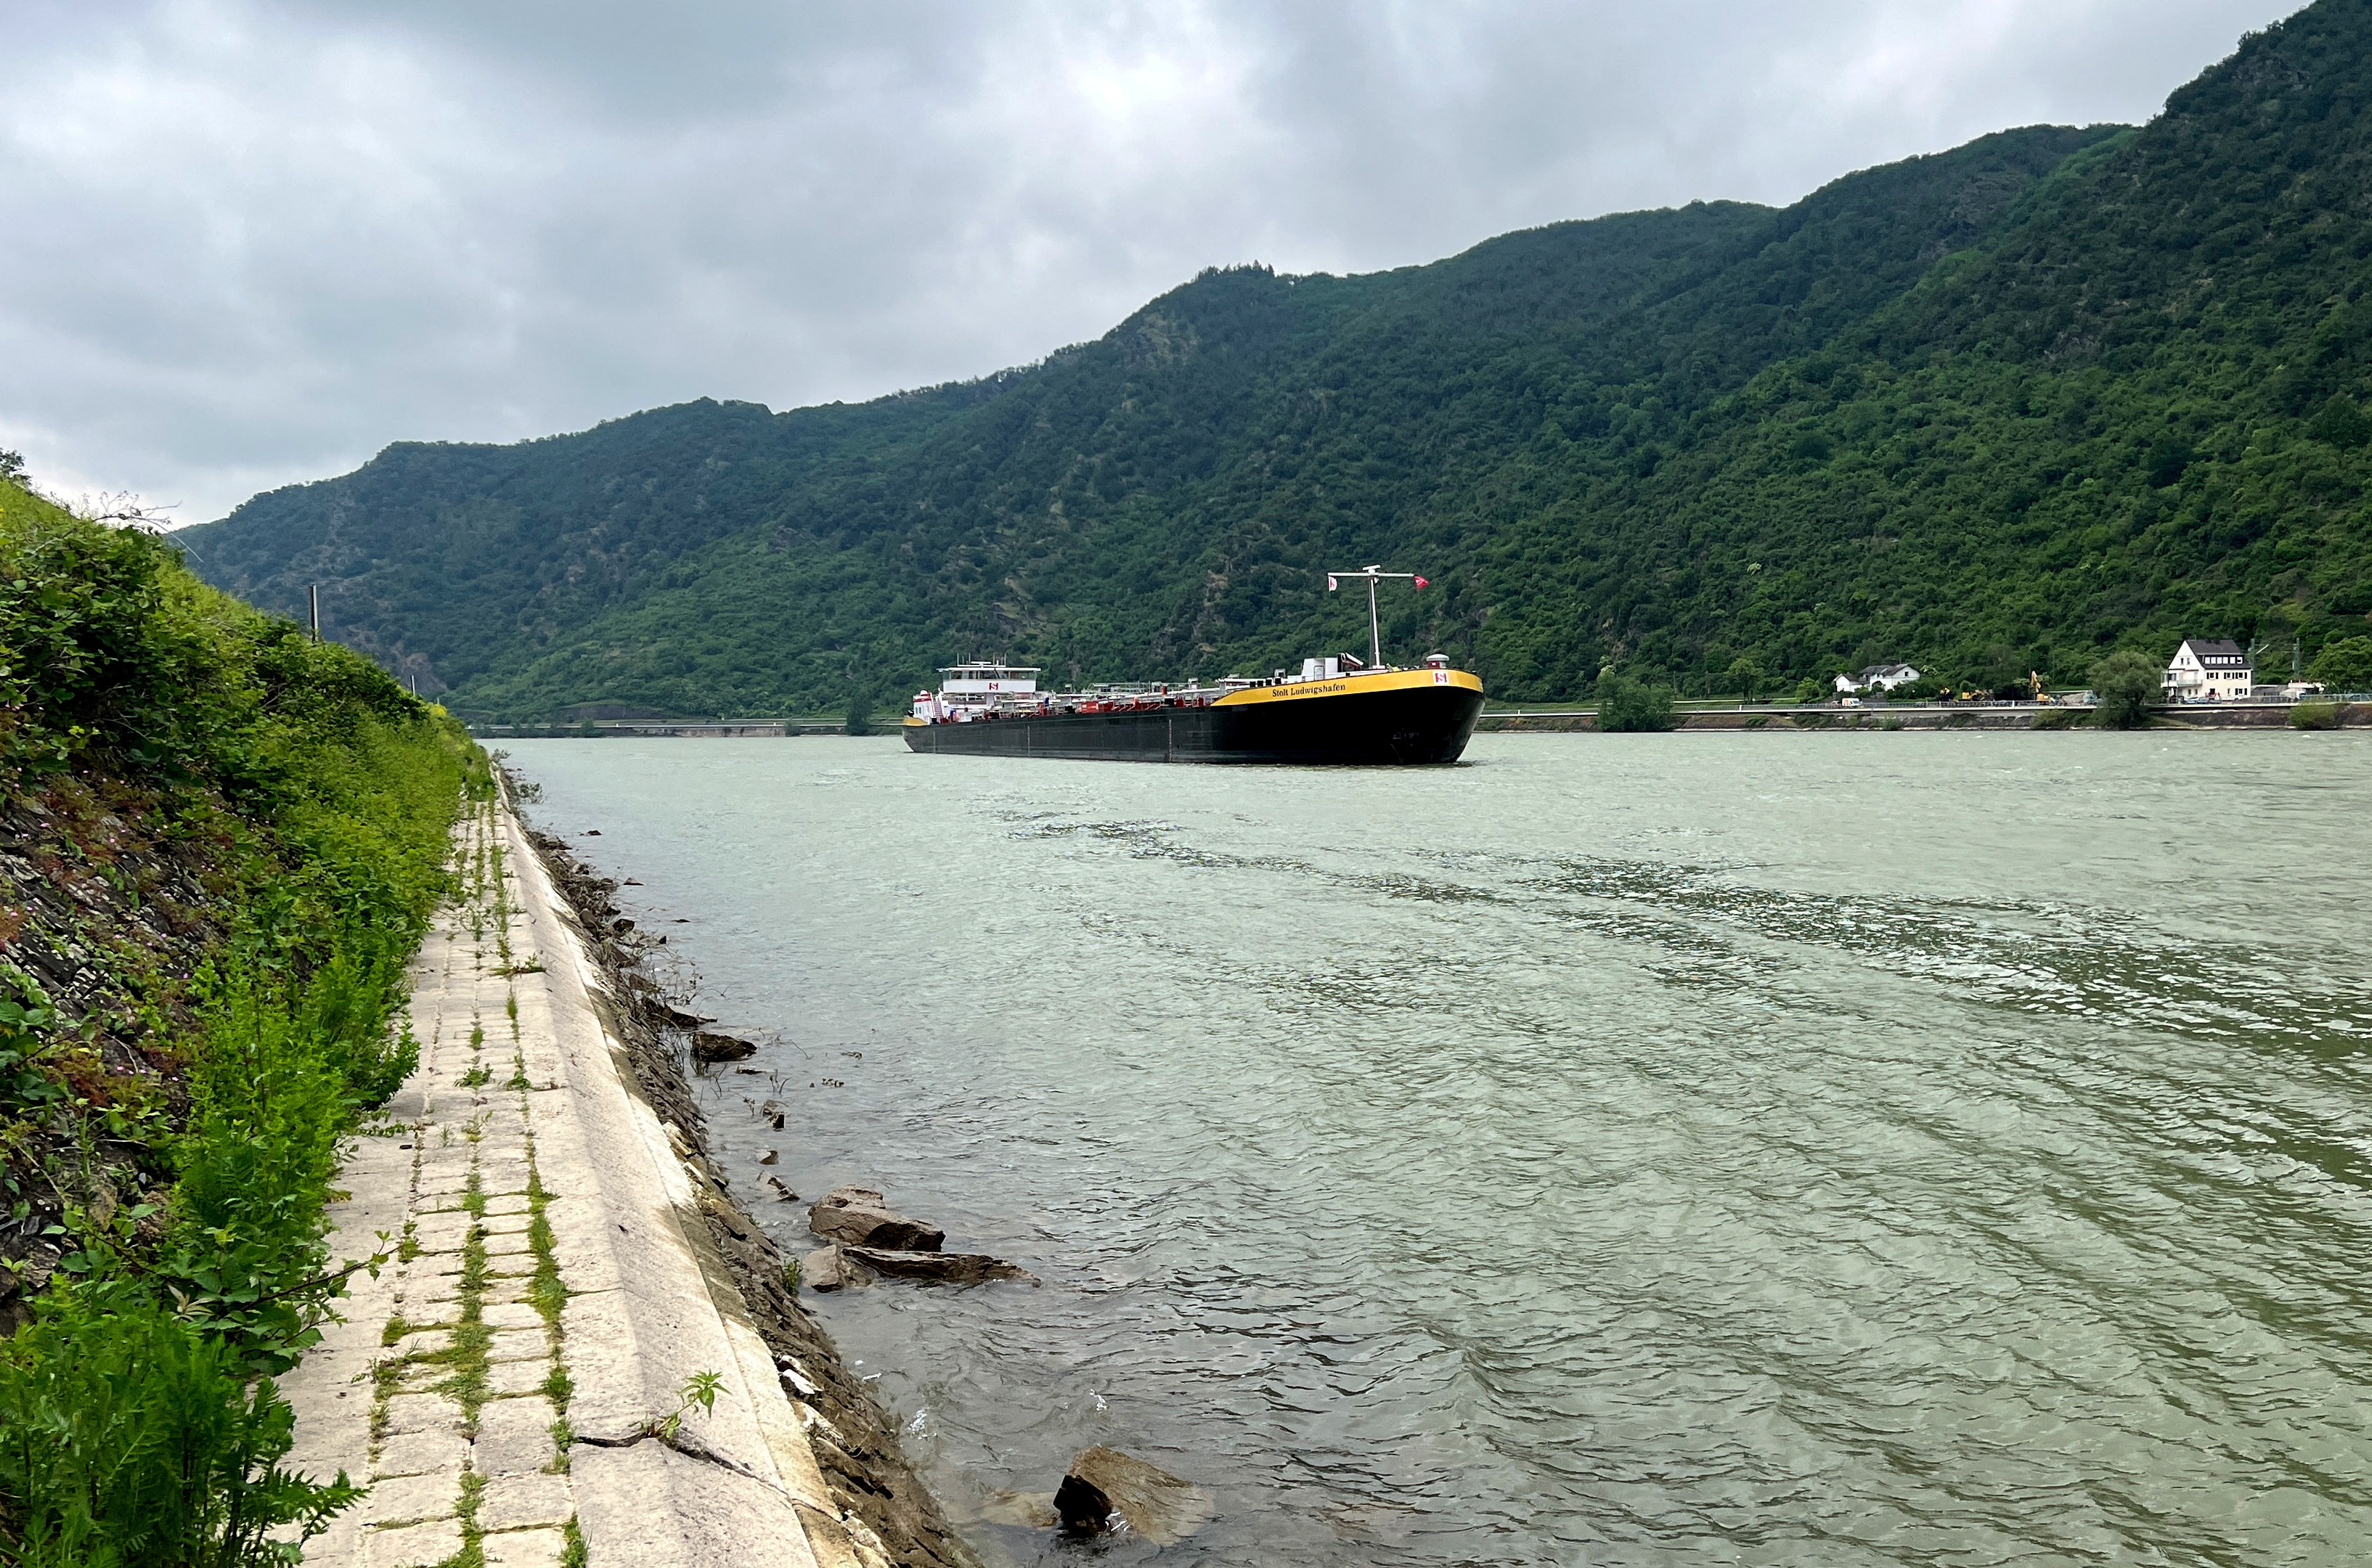 A special tanker, able to pass on the Rhine river even at low water levels sails past Bad Salzig